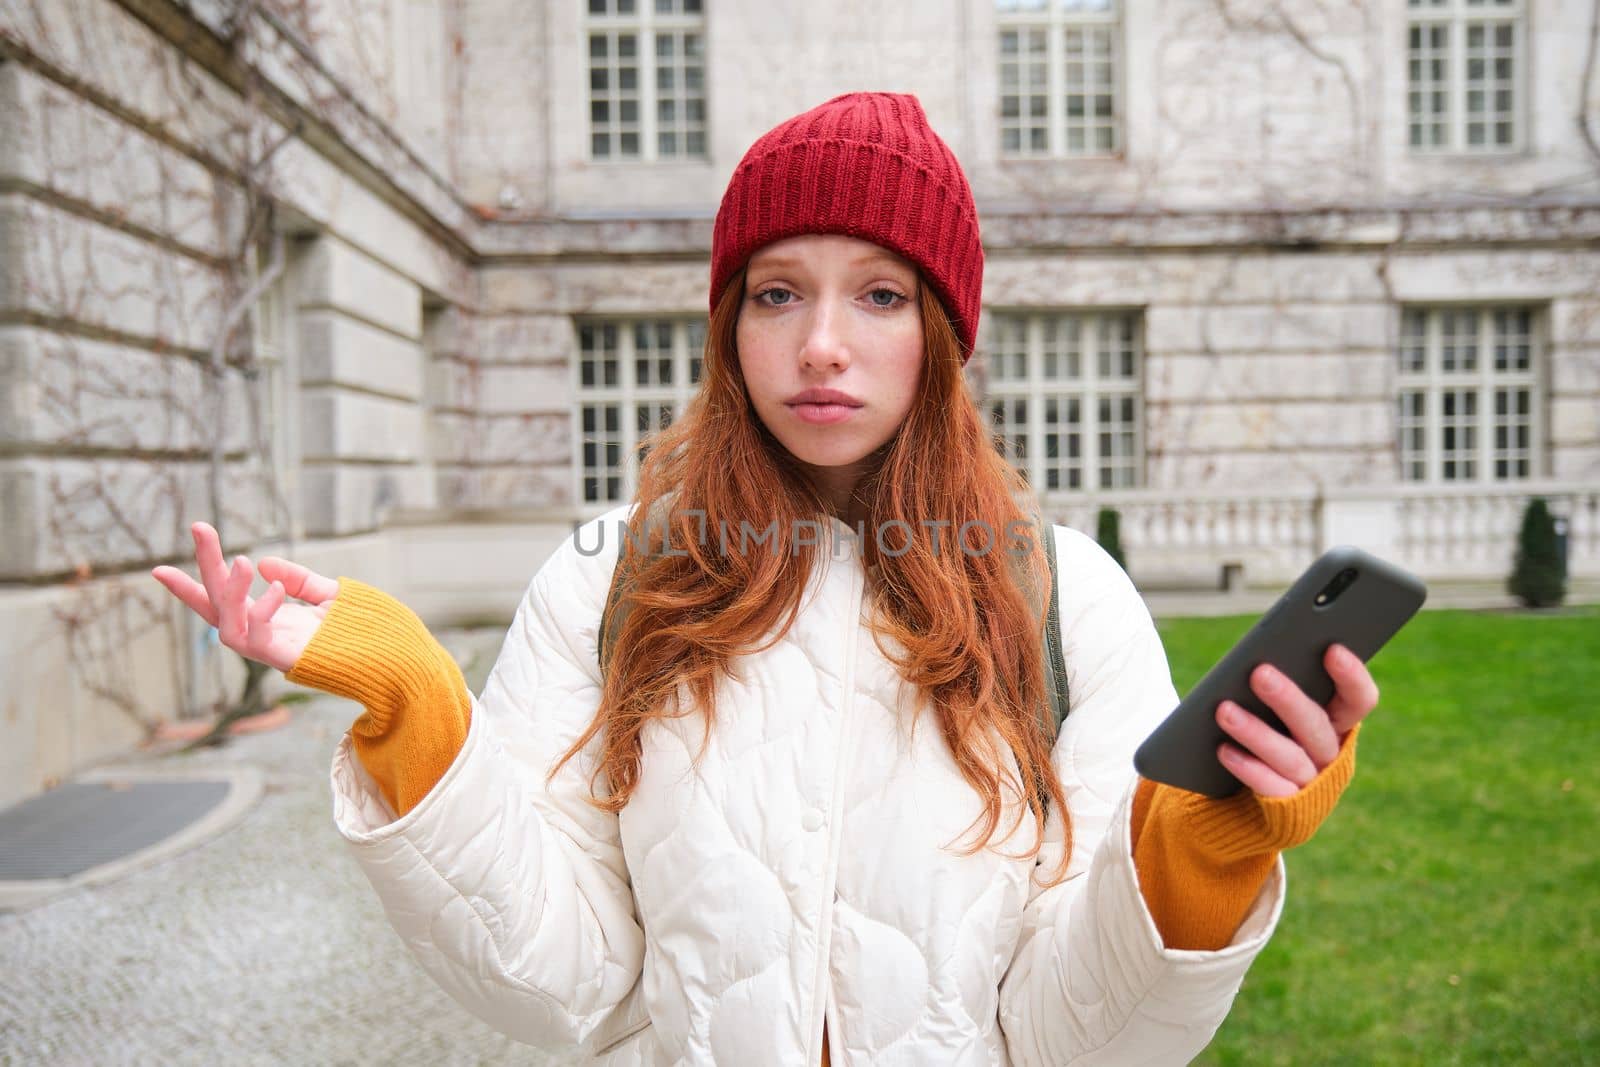 Portrait of confused redhead girl with smartphone, shrugs shoulders with puzzled, clueless face expression, tourist got lost in city.